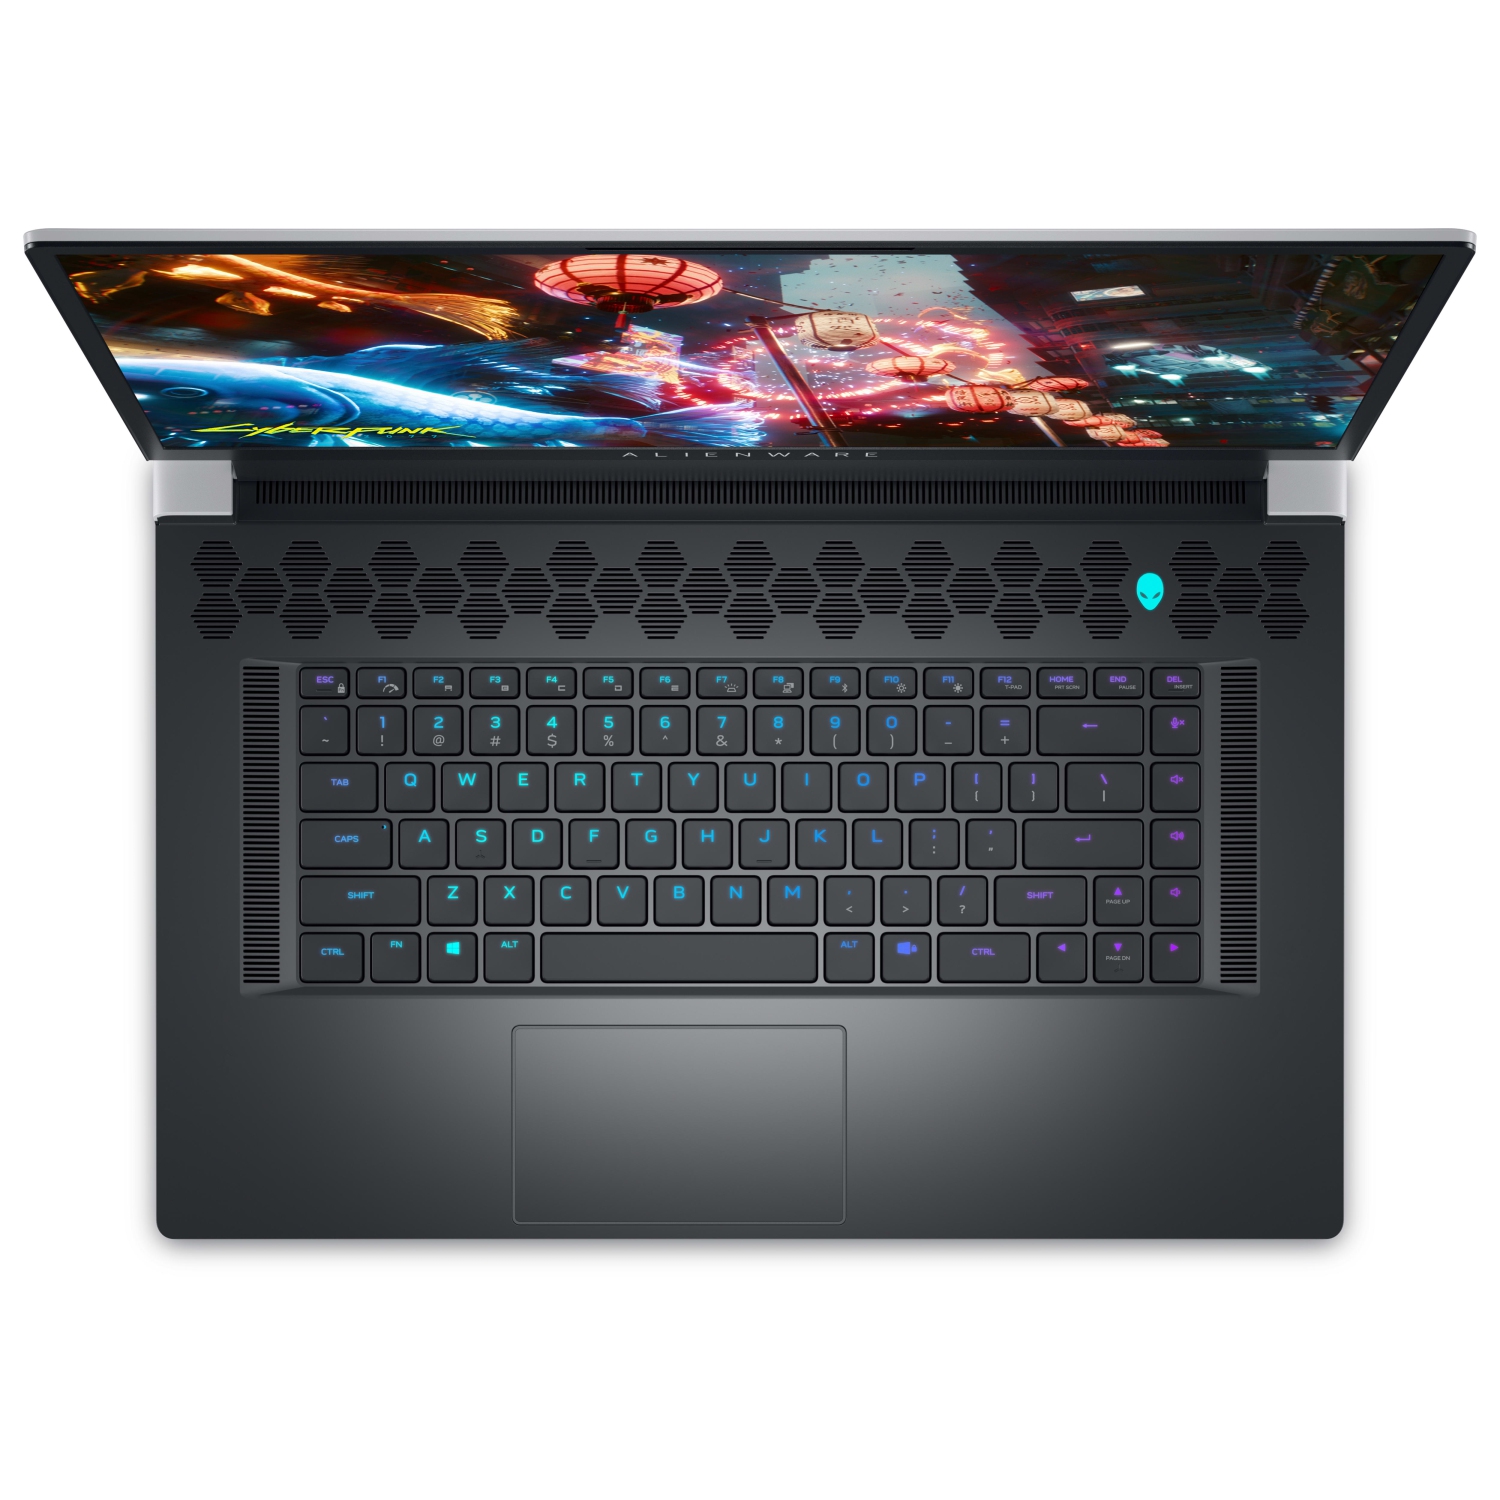 Refurbished (Excellent) – Dell Alienware X17 R2 Gaming Laptop (2022) | 17.3" FHD | Core i7 - 2TB SSD - 32GB RAM - 3080 Ti | 14 Cores @ 4.7 GHz - 12th Gen CPU - 16GB GDDR6X